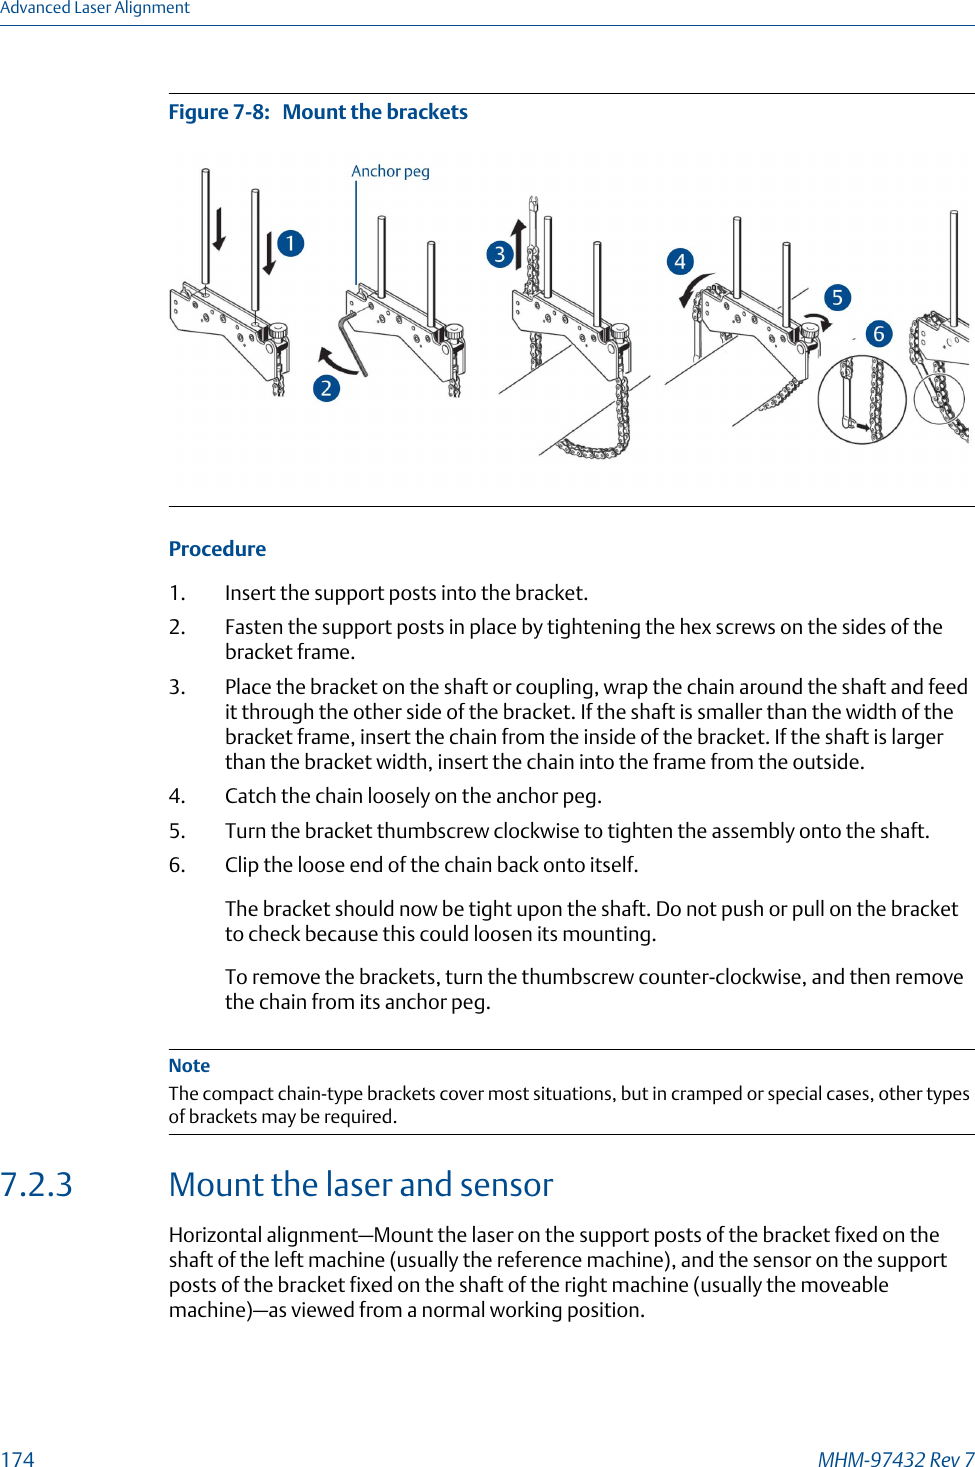 Mount the bracketsFigure 7-8:   Procedure1. Insert the support posts into the bracket.2. Fasten the support posts in place by tightening the hex screws on the sides of thebracket frame.3. Place the bracket on the shaft or coupling, wrap the chain around the shaft and feedit through the other side of the bracket. If the shaft is smaller than the width of thebracket frame, insert the chain from the inside of the bracket. If the shaft is largerthan the bracket width, insert the chain into the frame from the outside.4. Catch the chain loosely on the anchor peg.5. Turn the bracket thumbscrew clockwise to tighten the assembly onto the shaft.6. Clip the loose end of the chain back onto itself.The bracket should now be tight upon the shaft. Do not push or pull on the bracketto check because this could loosen its mounting.To remove the brackets, turn the thumbscrew counter-clockwise, and then removethe chain from its anchor peg.NoteThe compact chain-type brackets cover most situations, but in cramped or special cases, other typesof brackets may be required.7.2.3 Mount the laser and sensorHorizontal alignment—Mount the laser on the support posts of the bracket fixed on theshaft of the left machine (usually the reference machine), and the sensor on the supportposts of the bracket fixed on the shaft of the right machine (usually the moveablemachine)—as viewed from a normal working position.Advanced Laser Alignment174 MHM-97432 Rev 7